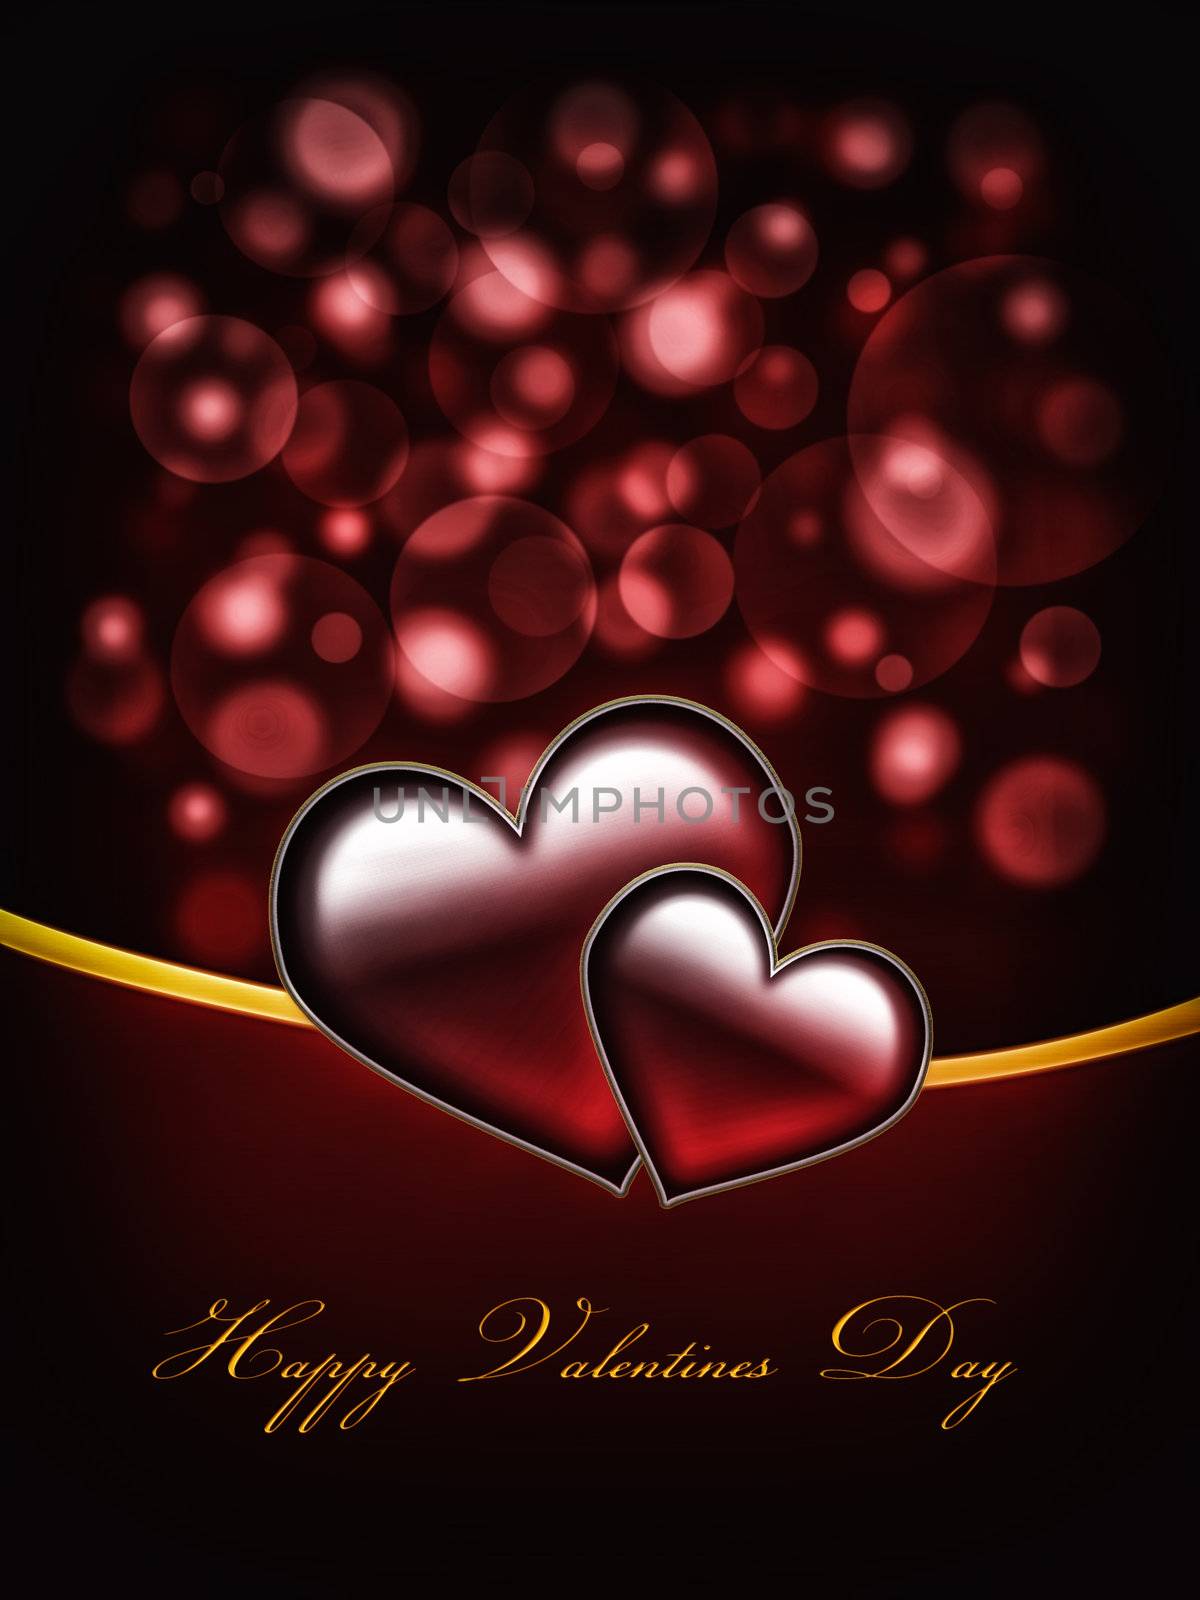 Valentines Day Card with Happy Valentines Day text and two big hearts - all in red and gold